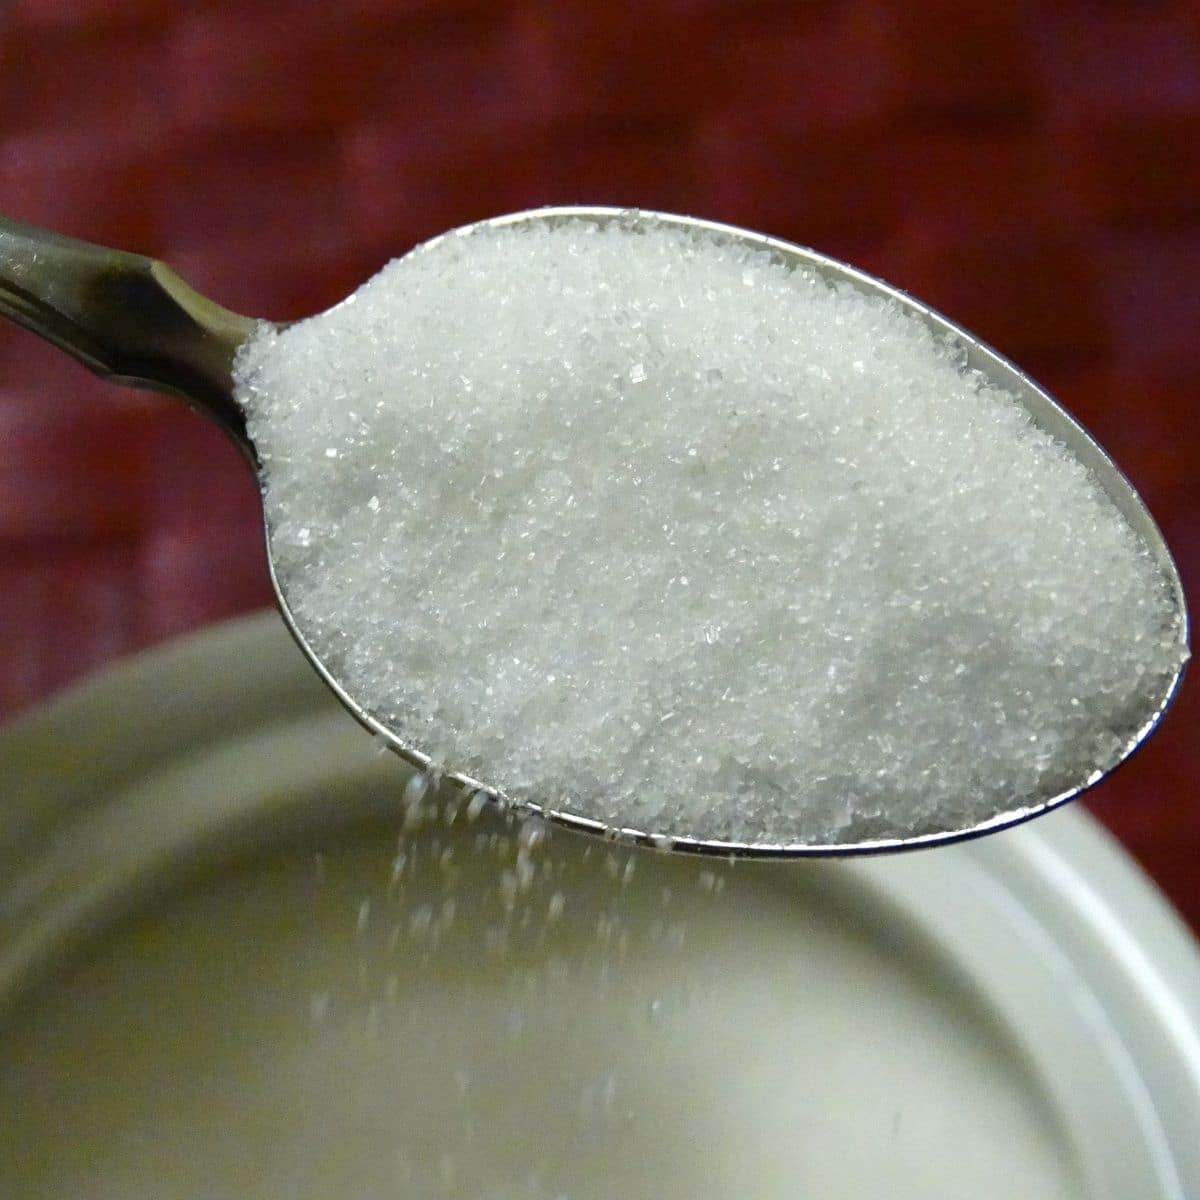 Sugar being spooned from container.